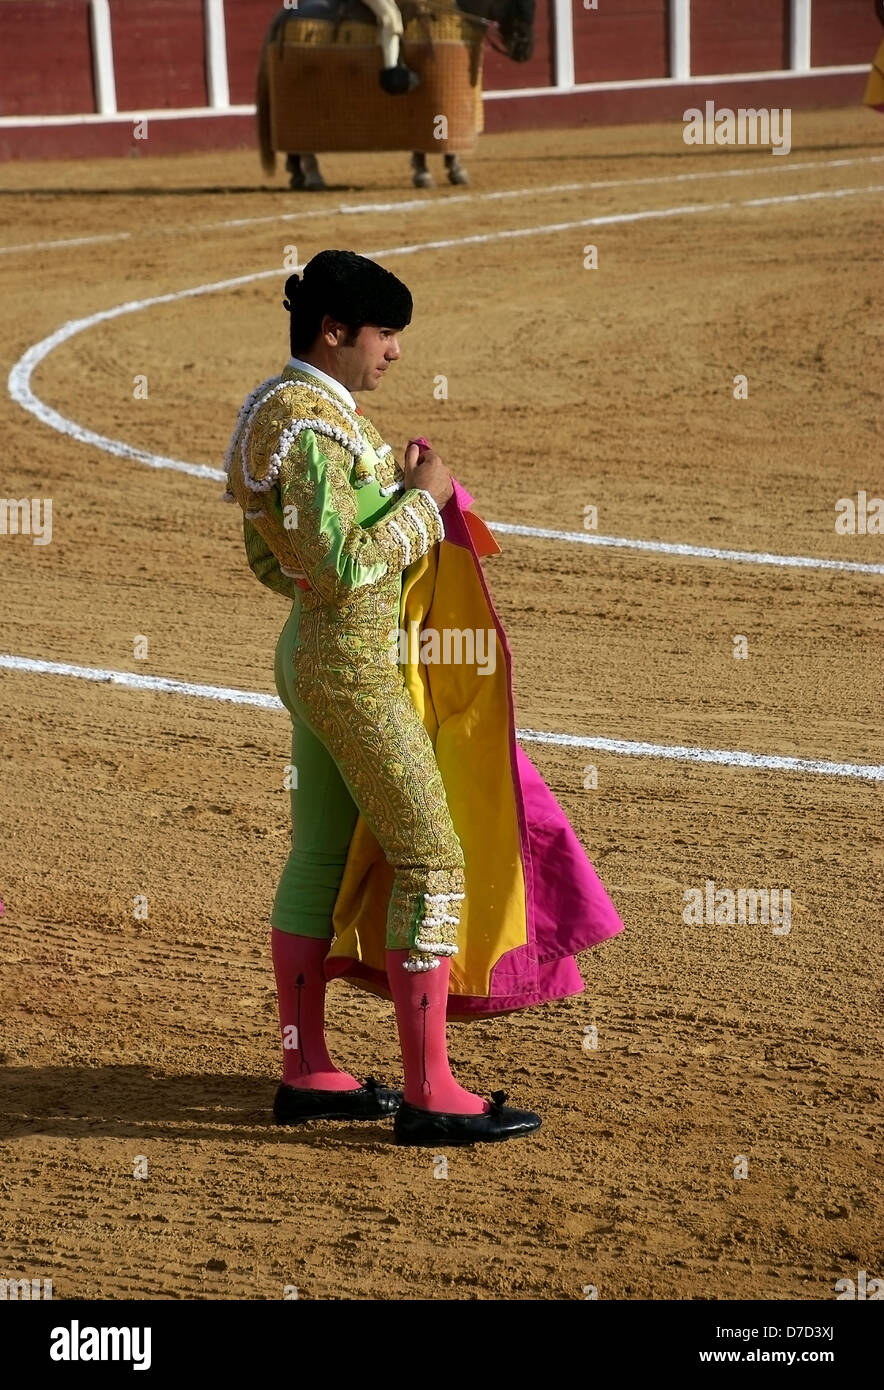 Banderillero, the Torero Who, on Foot, Places the Darts in the Bull  Editorial Stock Photo - Image of performance, spectacle: 34908528